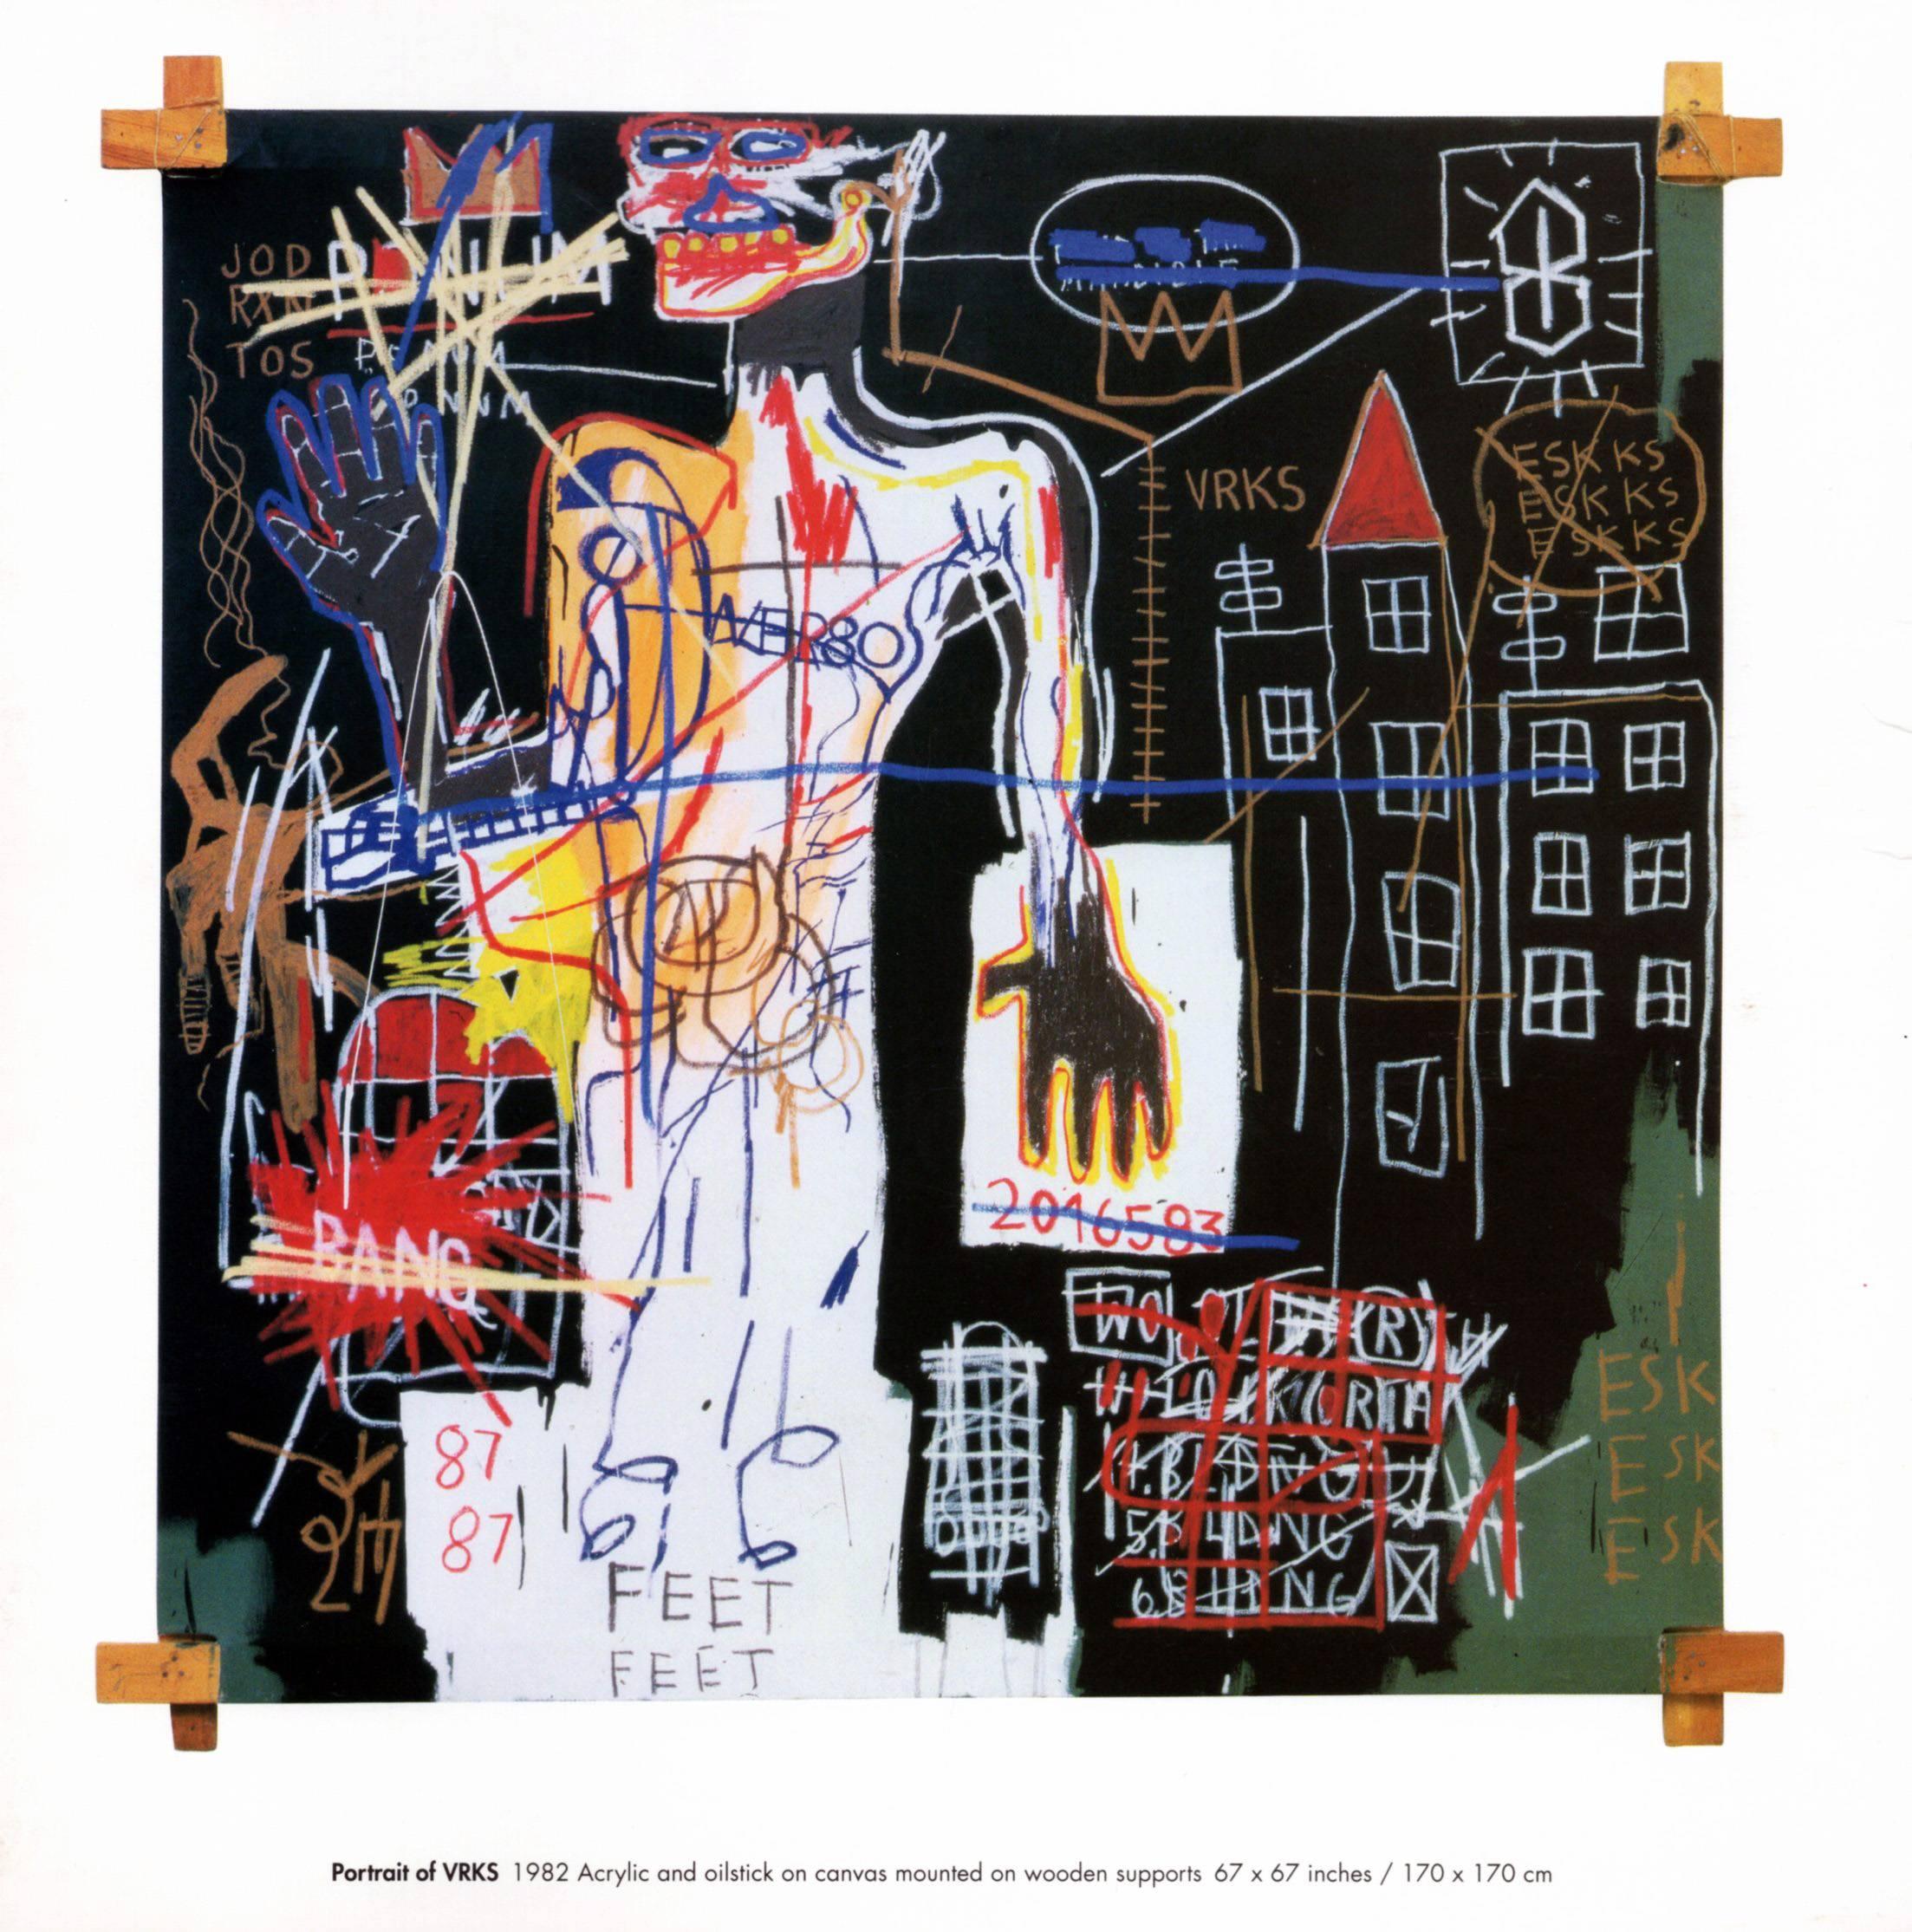 Basquiat announcement card/poster (Tony Shafrazi Gallery) - Art by after Jean-Michel Basquiat